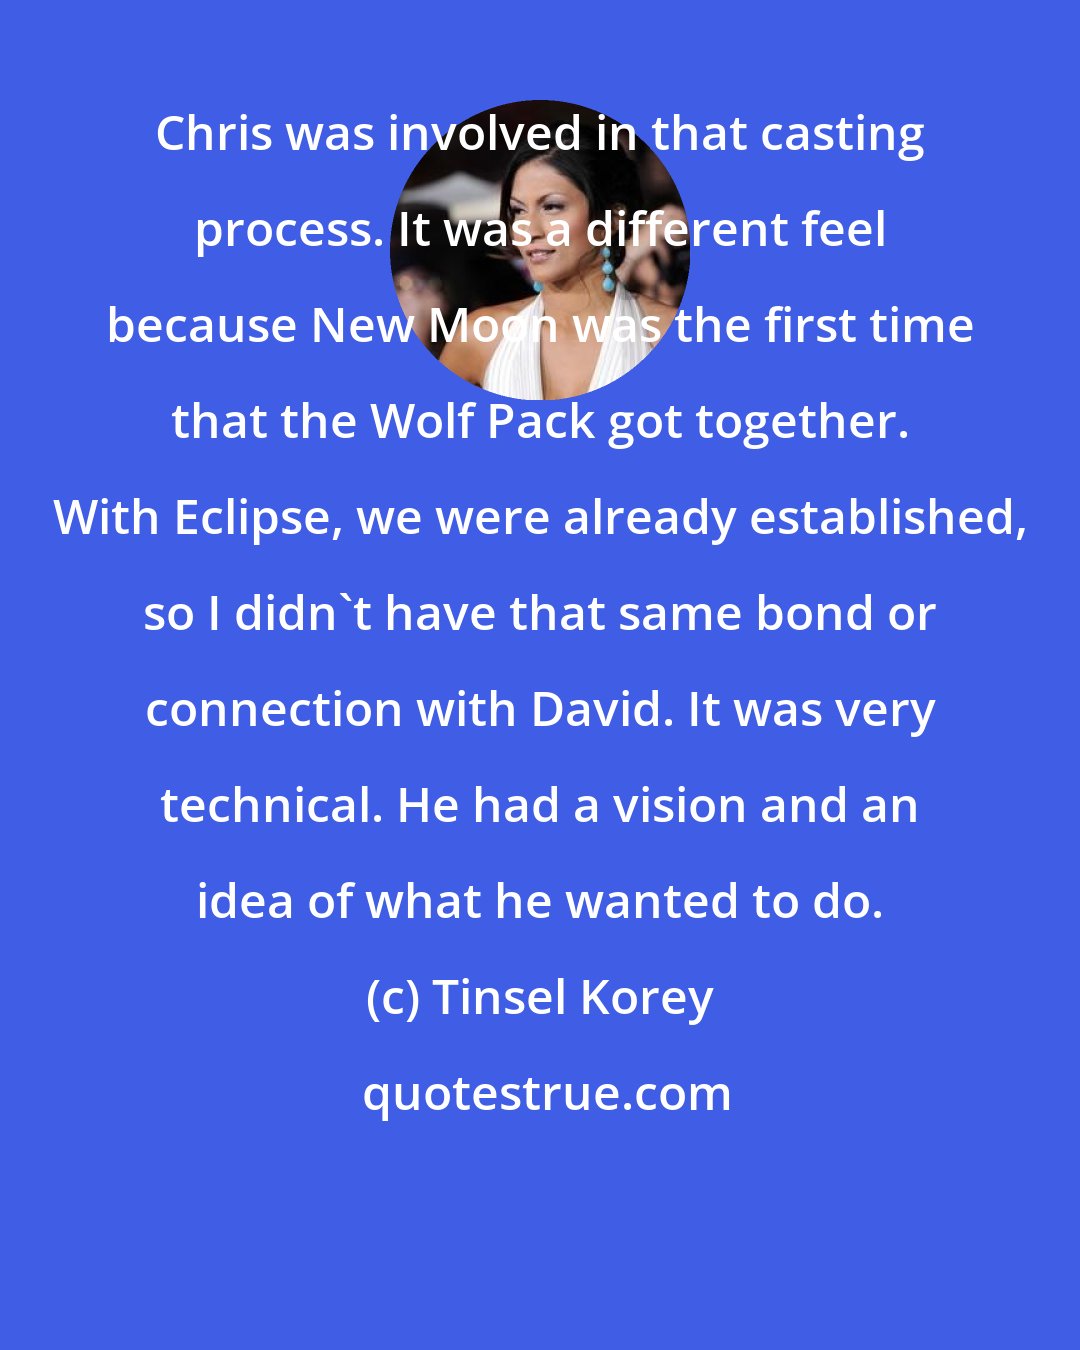 Tinsel Korey: Chris was involved in that casting process. It was a different feel because New Moon was the first time that the Wolf Pack got together. With Eclipse, we were already established, so I didn't have that same bond or connection with David. It was very technical. He had a vision and an idea of what he wanted to do.